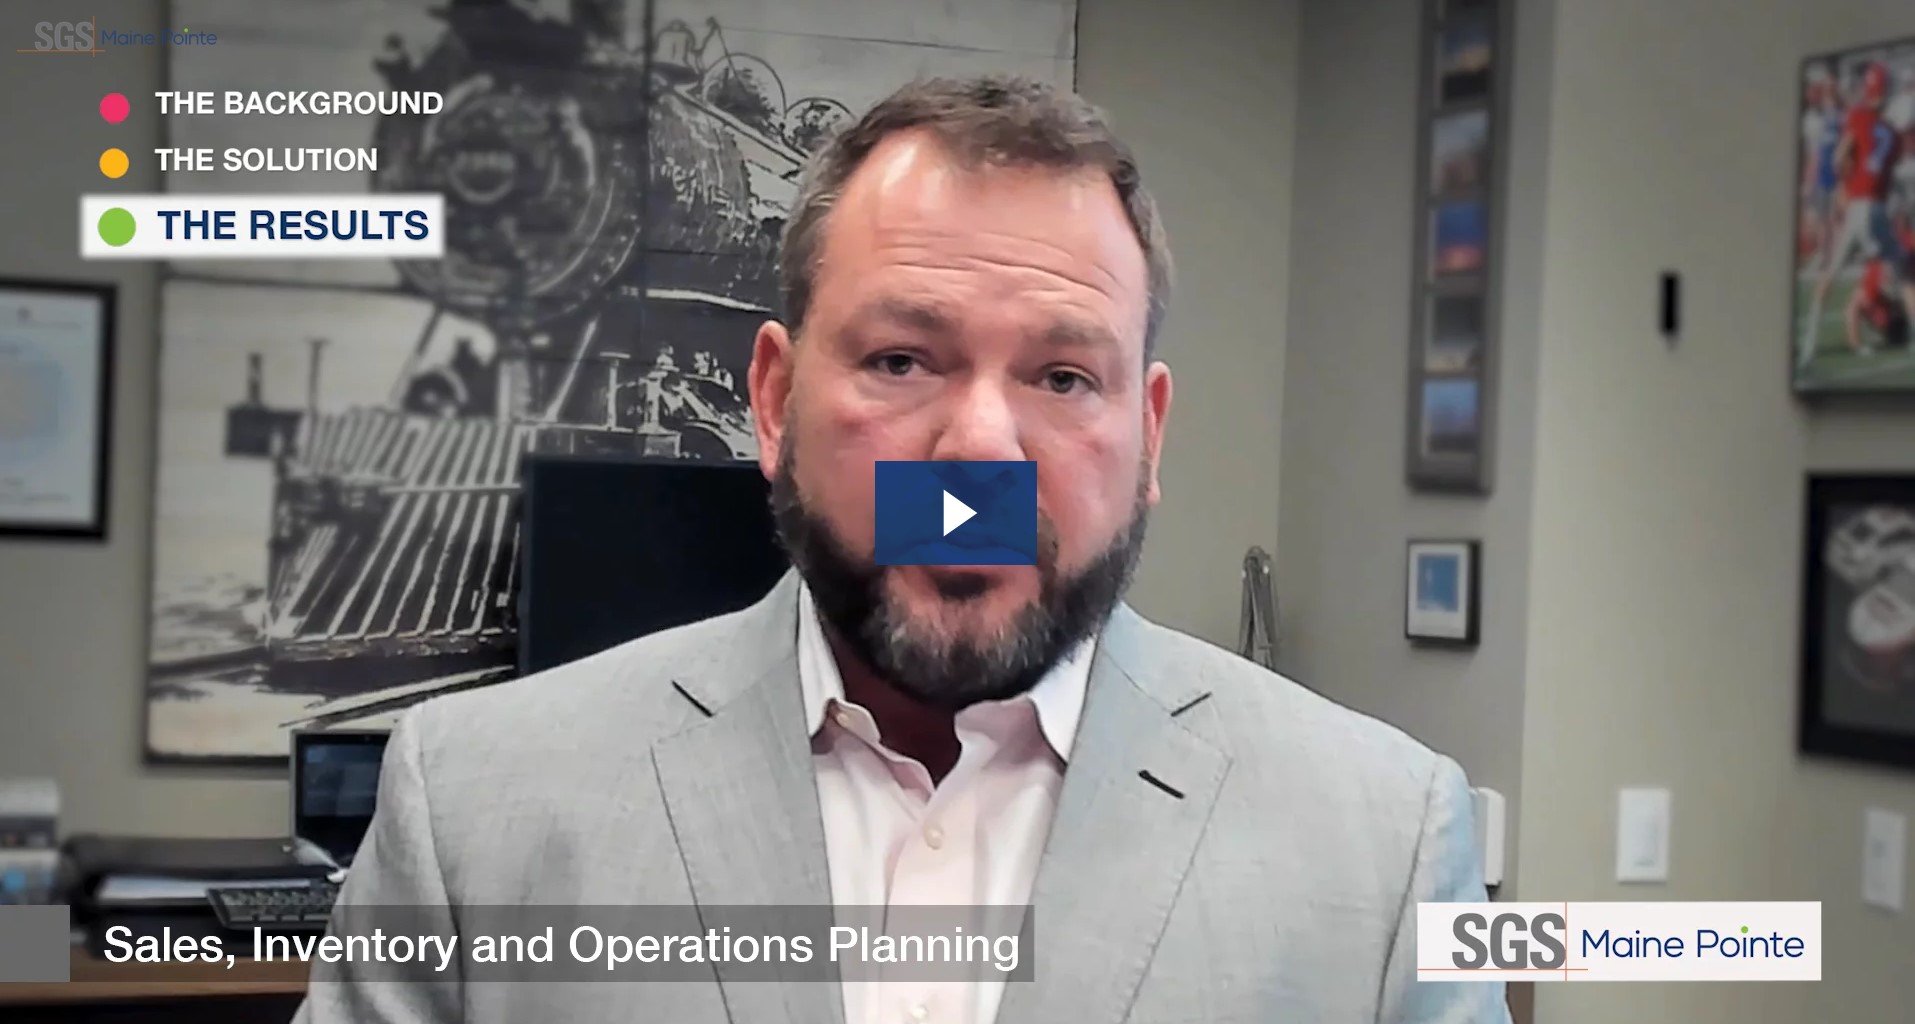 Client Video: Effectively address unexpected changes in the market